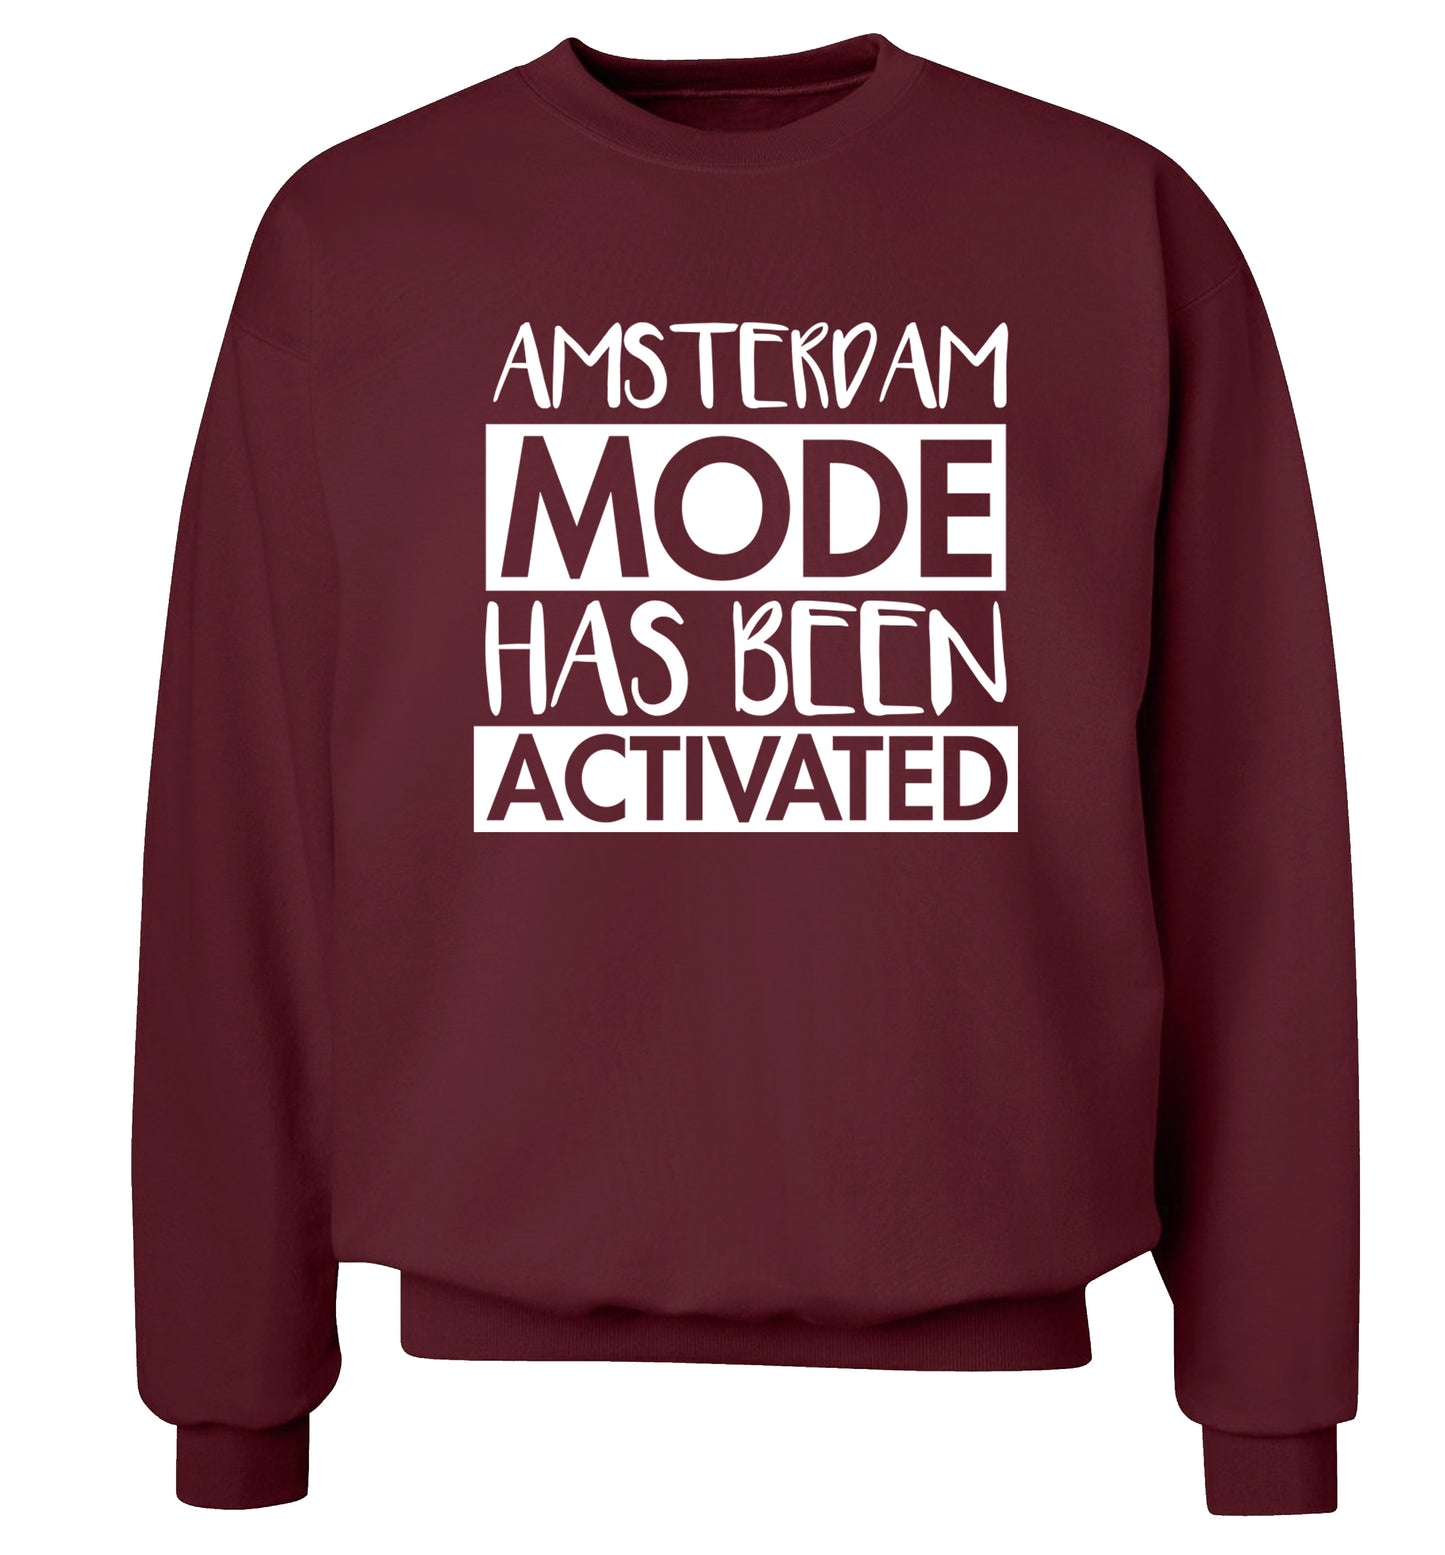 Amsterdam mode has been activated Adult's unisex maroon Sweater 2XL